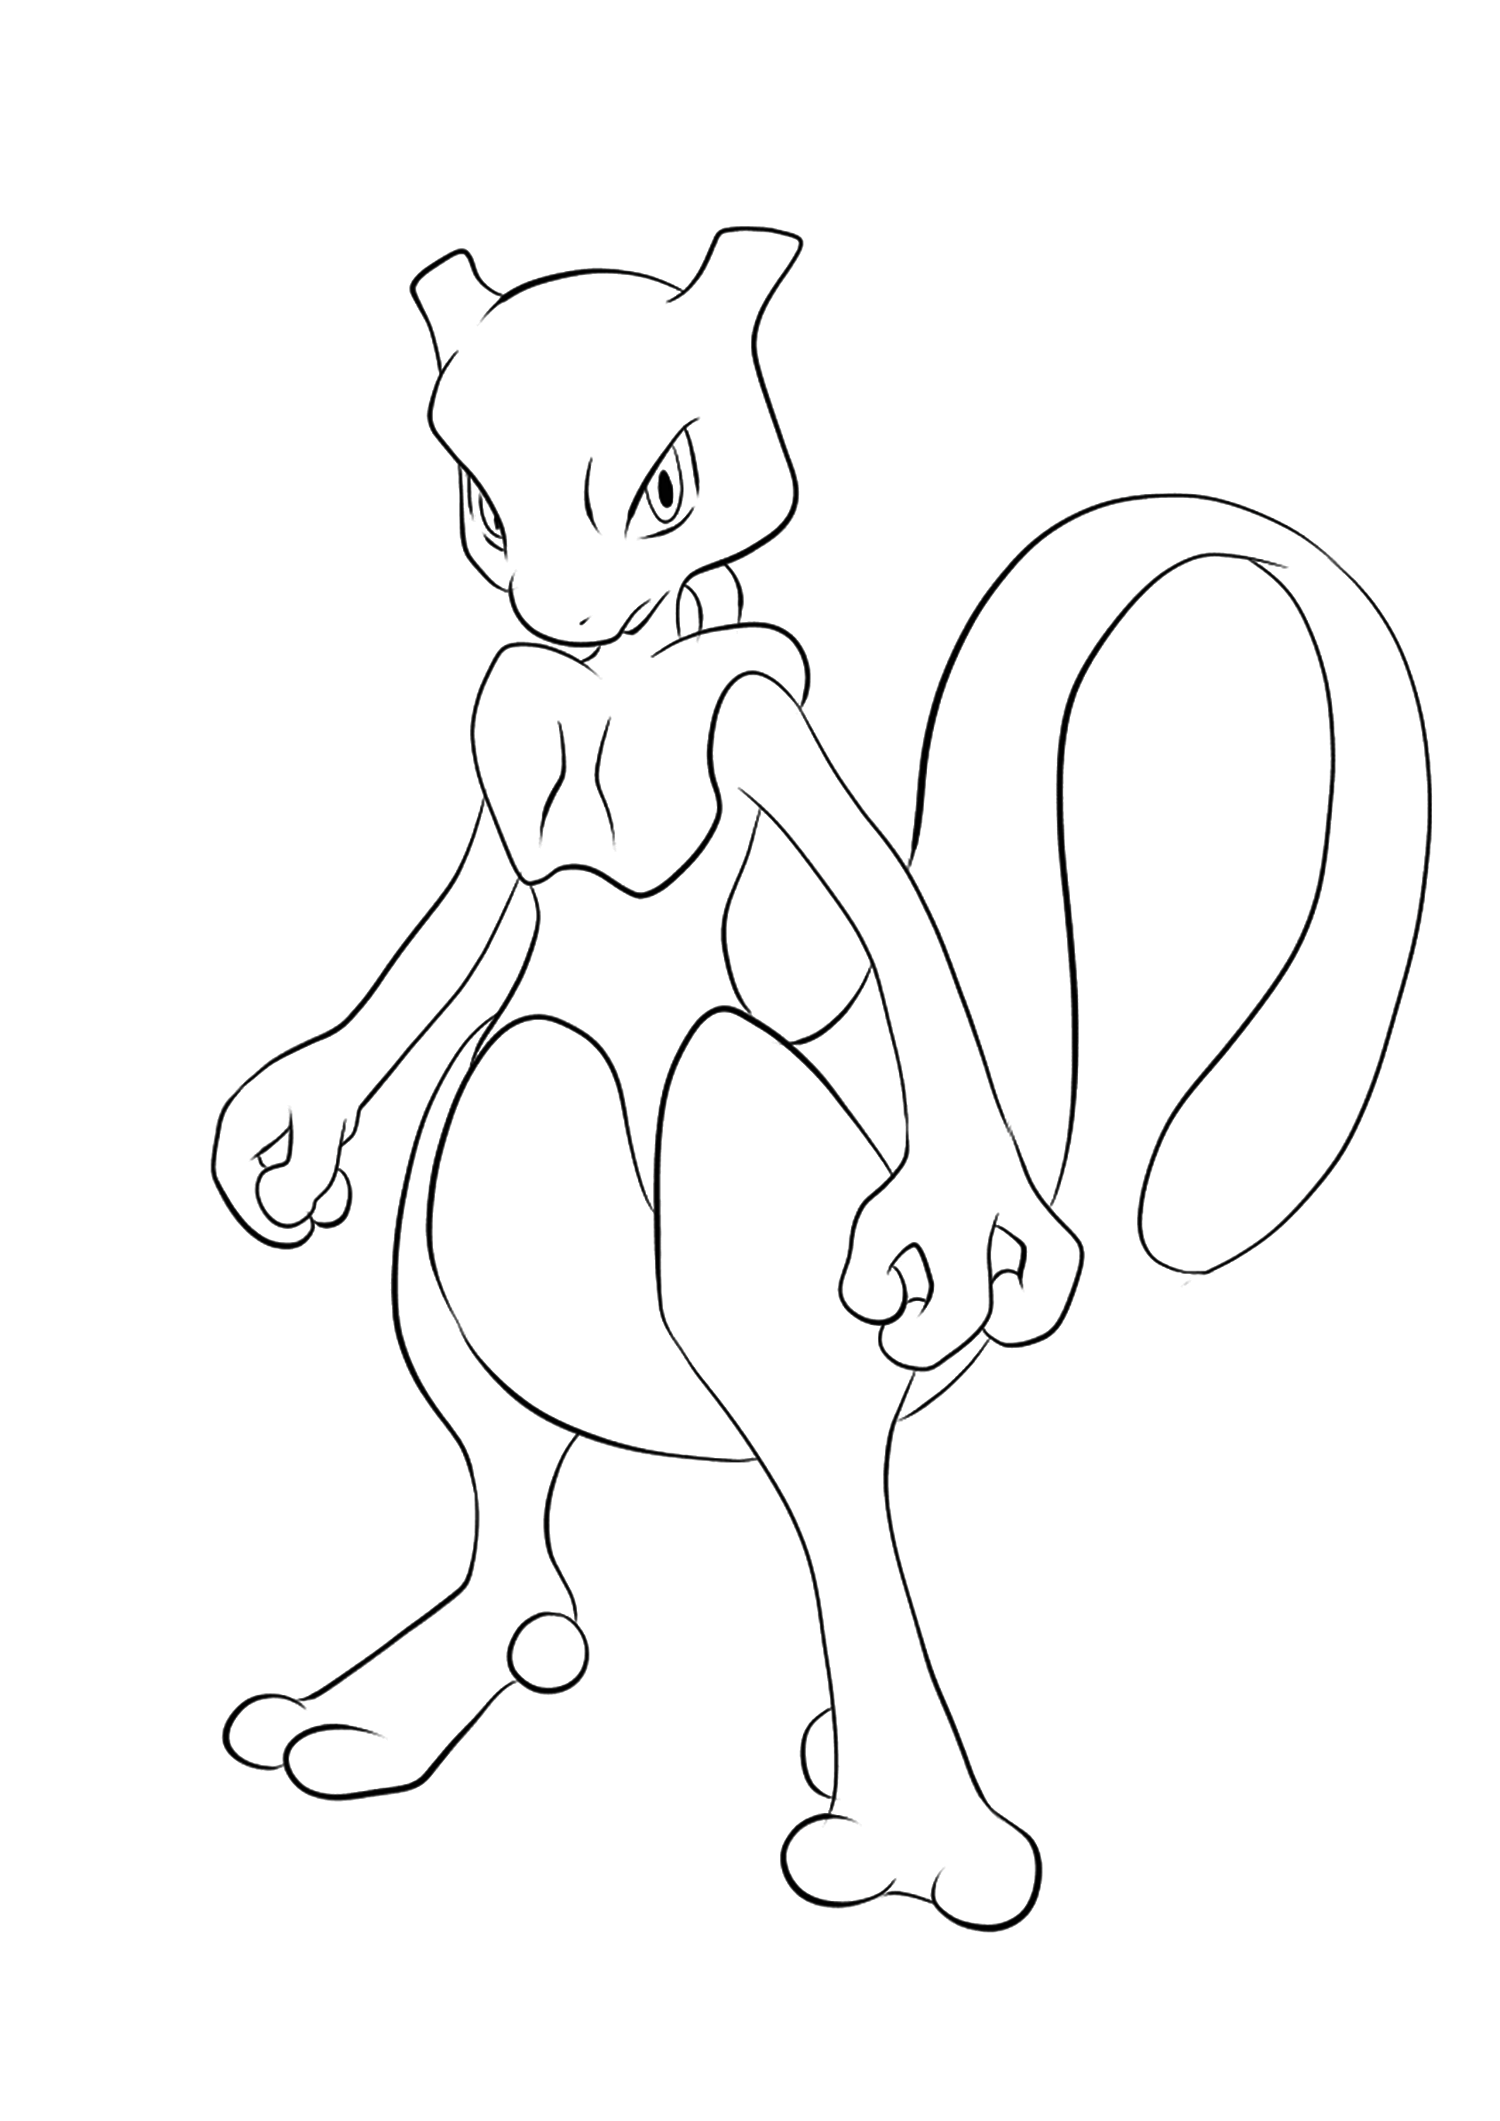 Pokemon Mewtwo Coloring Pages  Pokemon coloring pages, Free kids coloring  pages, Pokemon coloring sheets